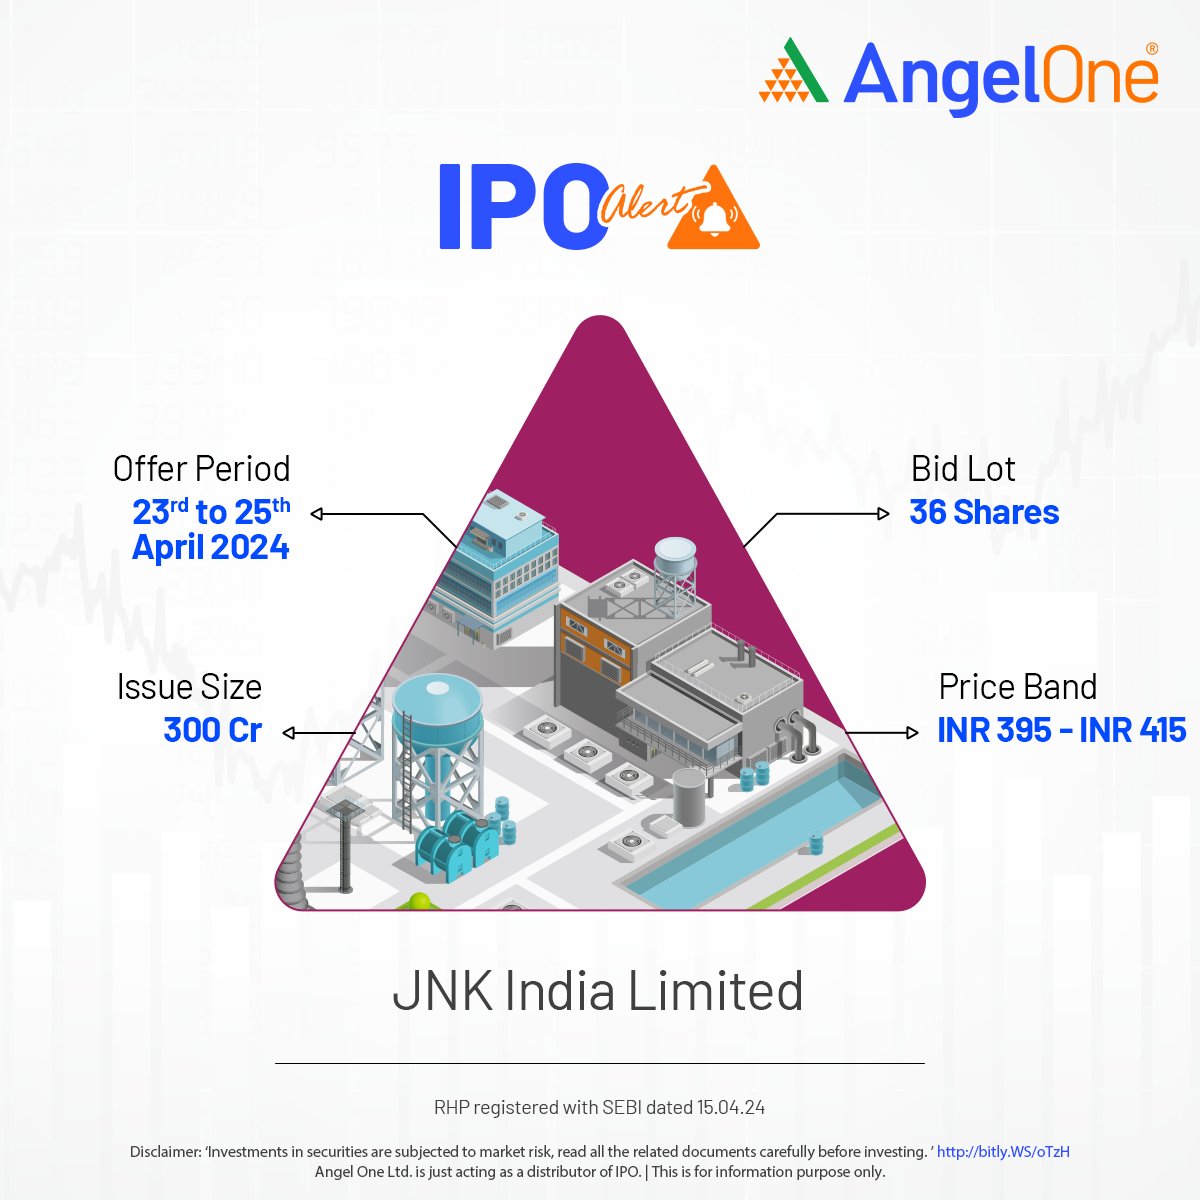 Don't miss out on this IPO by JNK India Limited. Established in 2010, JNK India Ltd is a joint venture with KOSDAQ-listed JNK Heaters Co. Ltd, Seoul. Specializing in EPC, it operates globally in Petrochemical, Oil & Gas, Fertilizer, and Chemical sectors. #AngelOne #IPO